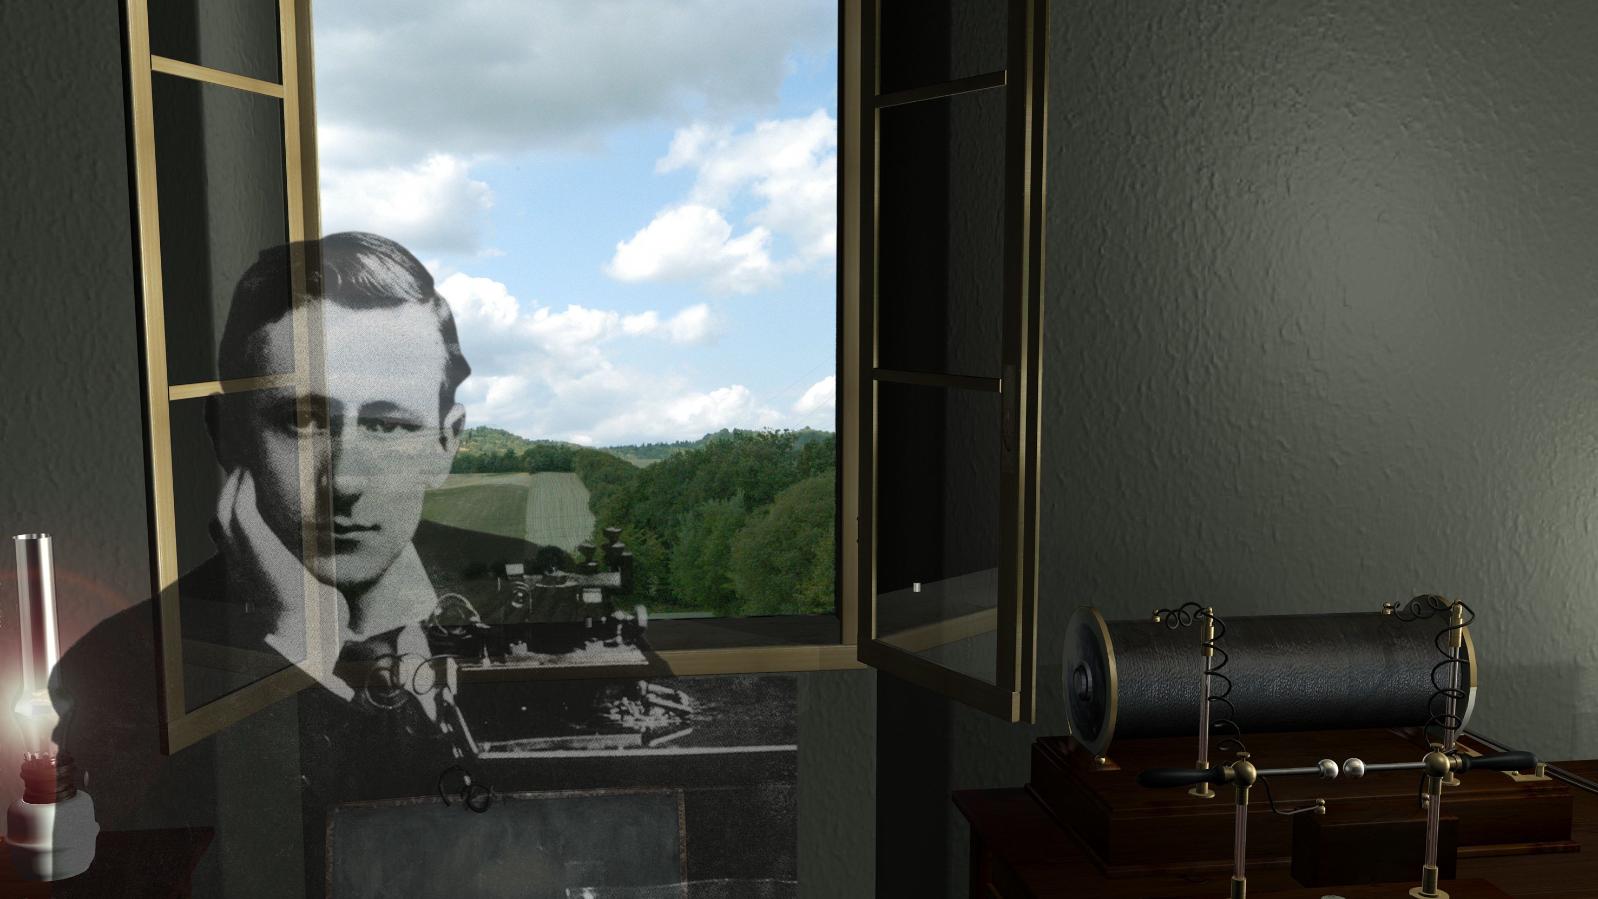 Image of Guglielmo Marconi overlaid on an open window, with some of his equipment in the foreground